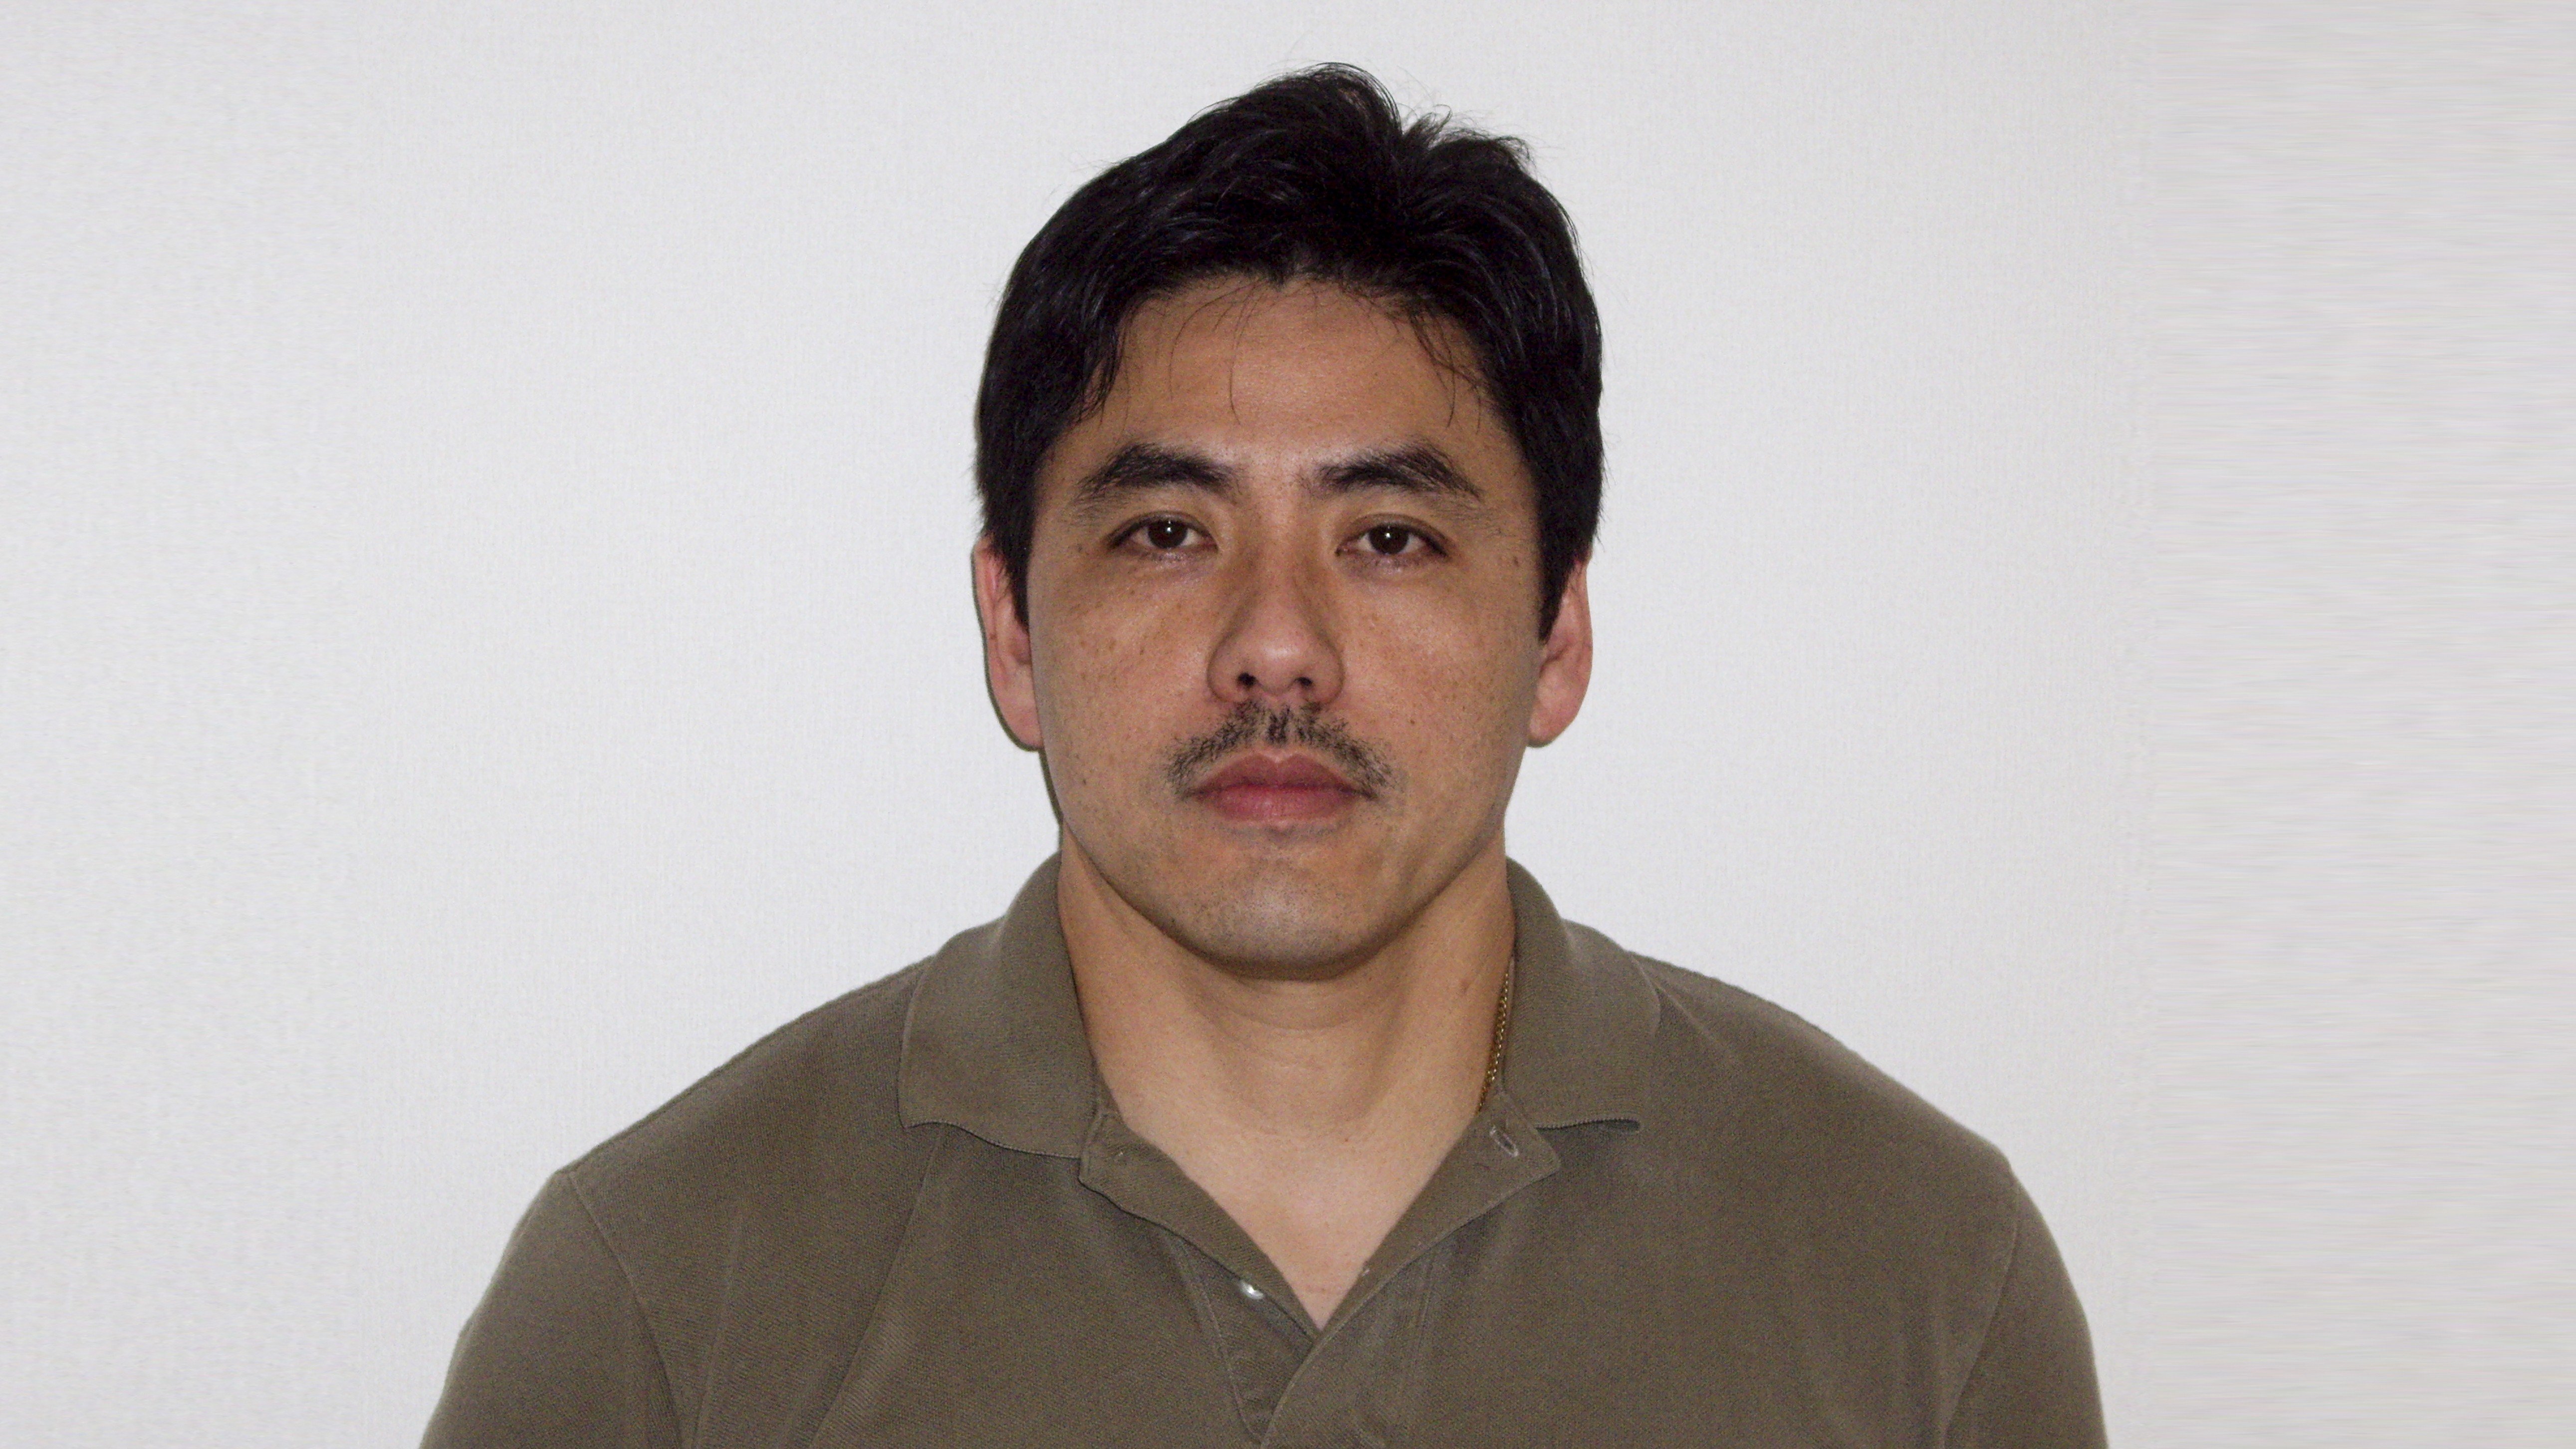 Undated photo of former CIA agent Jerry Chun Shing Lee. Photo: Handout